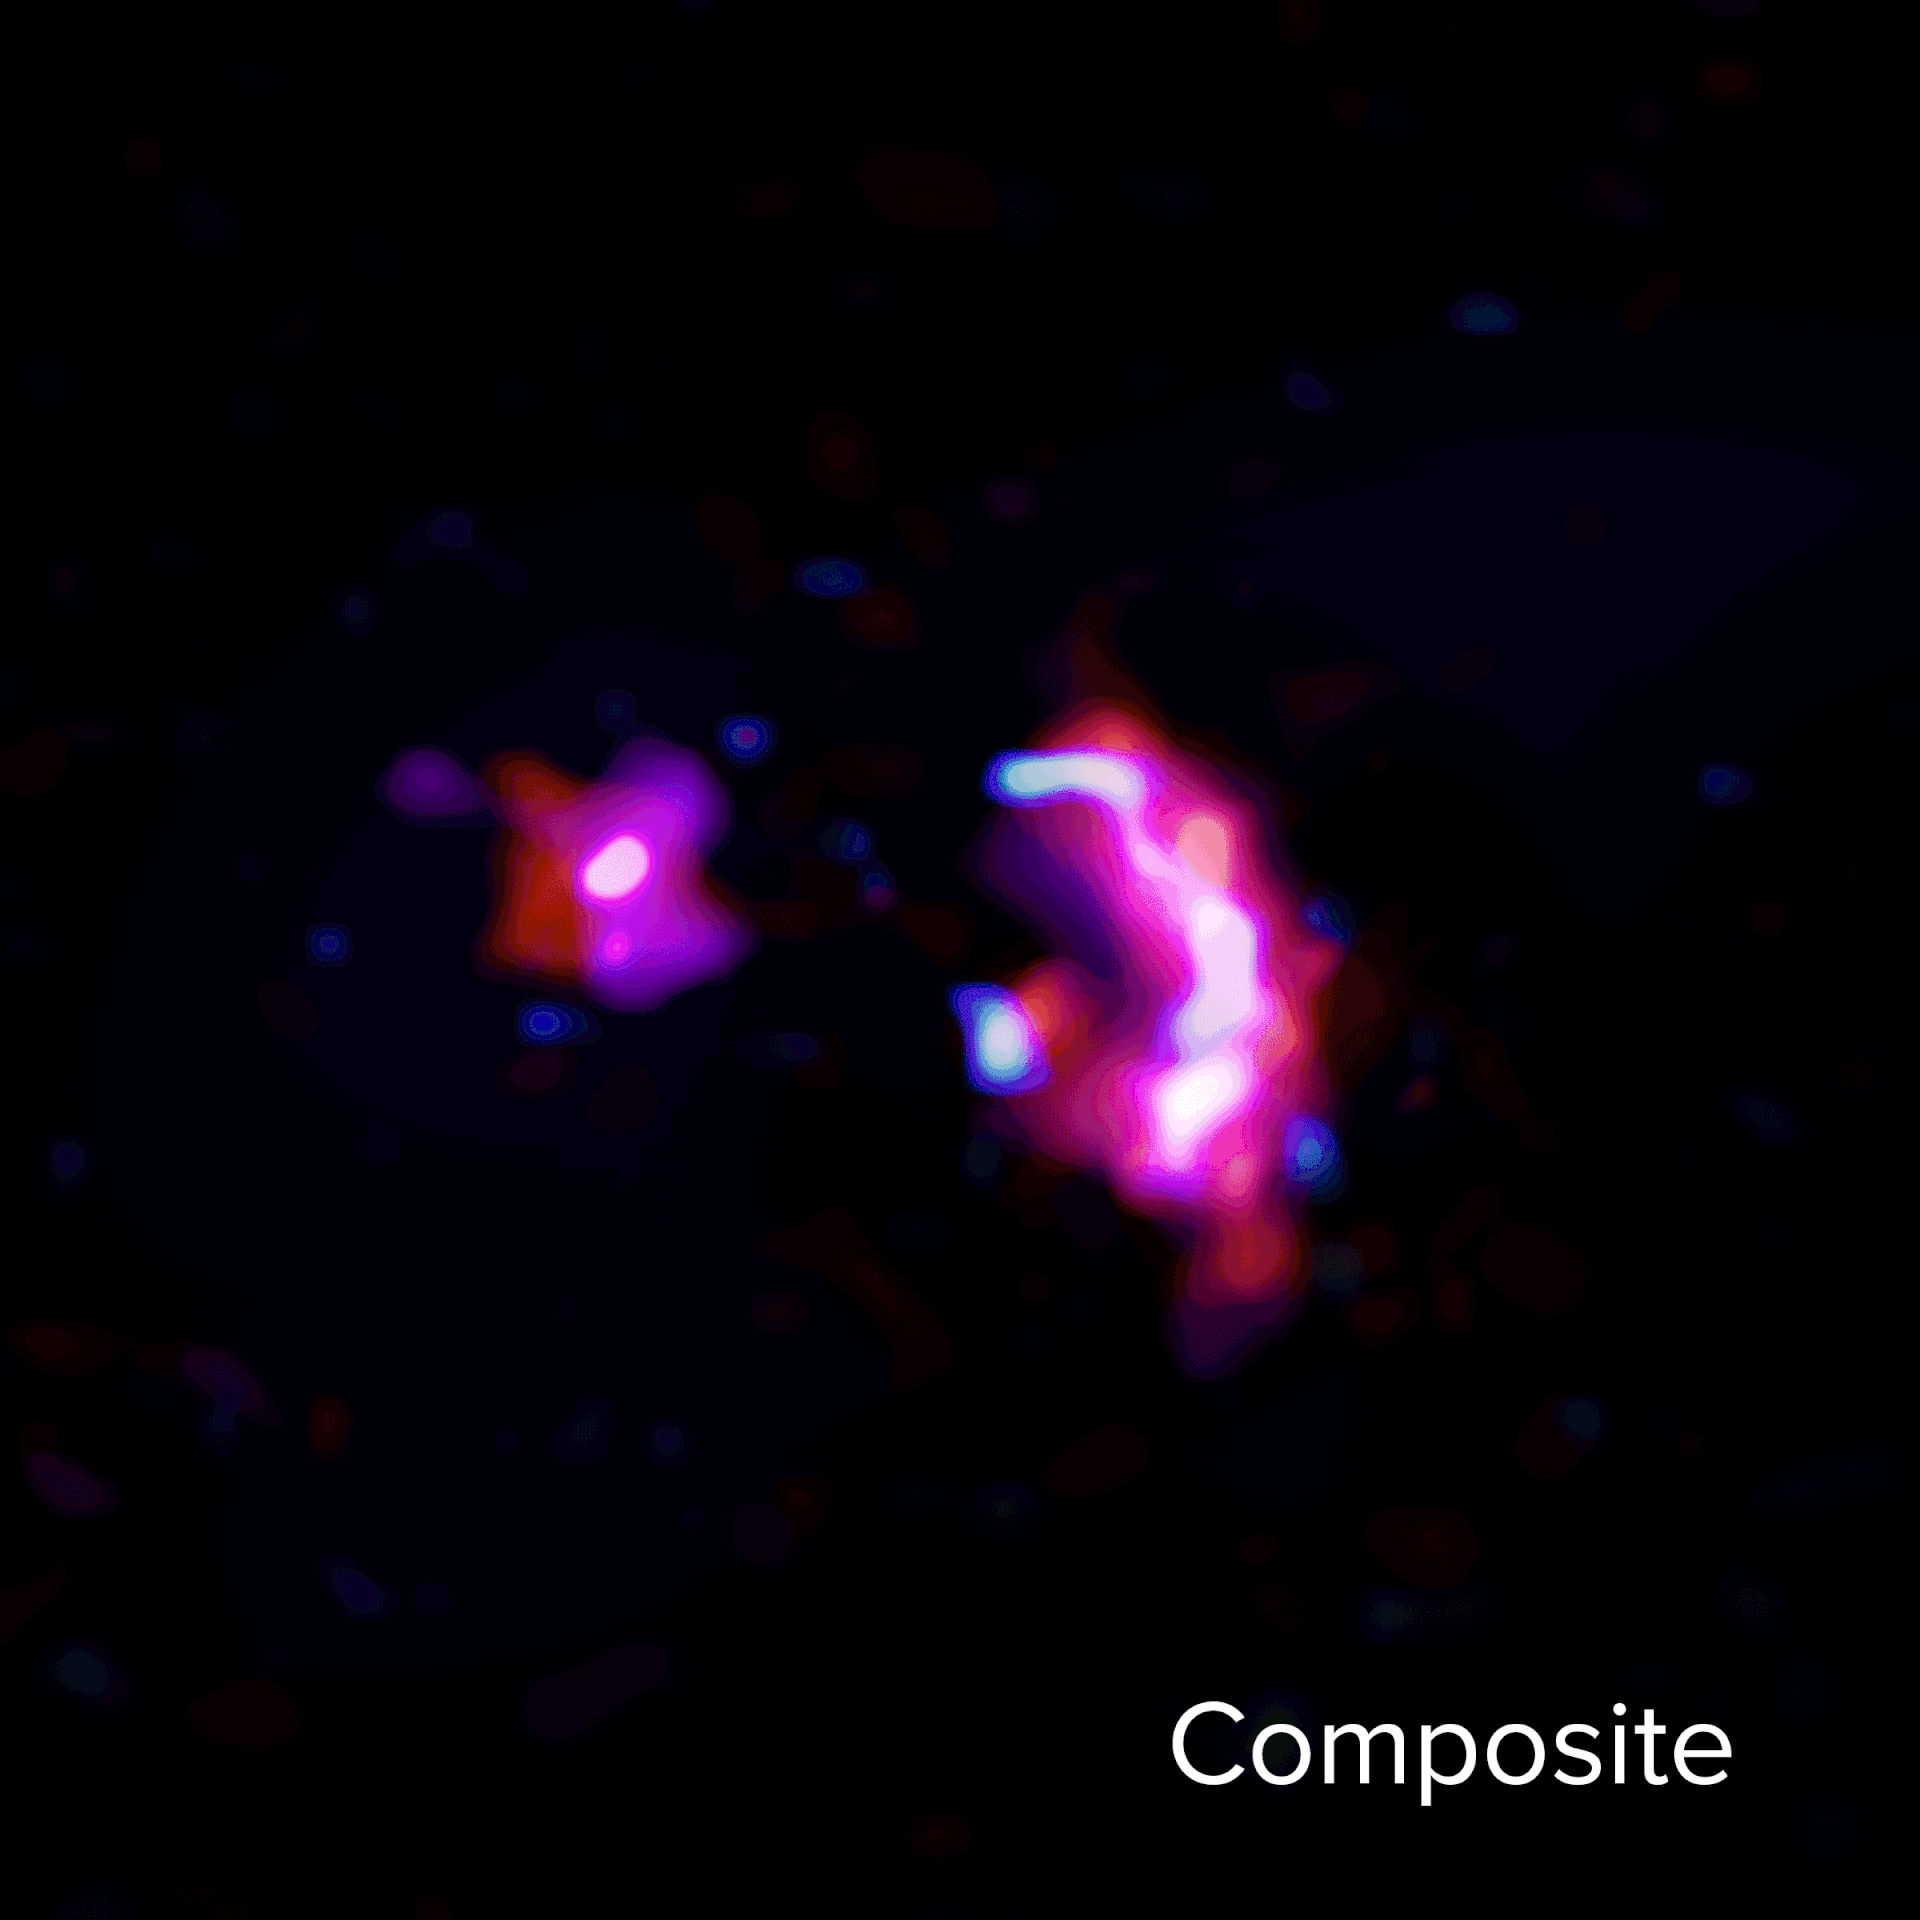 This animated gif moves through the dust continuum and molecular lines for water and carbon monoxide seen in ALMA observations of the pair of early massive galaxies known as SPT0311-58. This gif begins with a composite combining the dust continuum with molecular lines for H20 and CO. It is followed by the dust continuum seen in red, molecular lines for H20 seen in blue, molecular lines for carbon monoxide, CO(10-9) shown in pinks and deep blue, CO(7-6) shown in magenta, and CO(6-5) shown in purple. Credit: ALMA (ESO/NAOJ/NRAO)/S. Dagnello (NRAO)